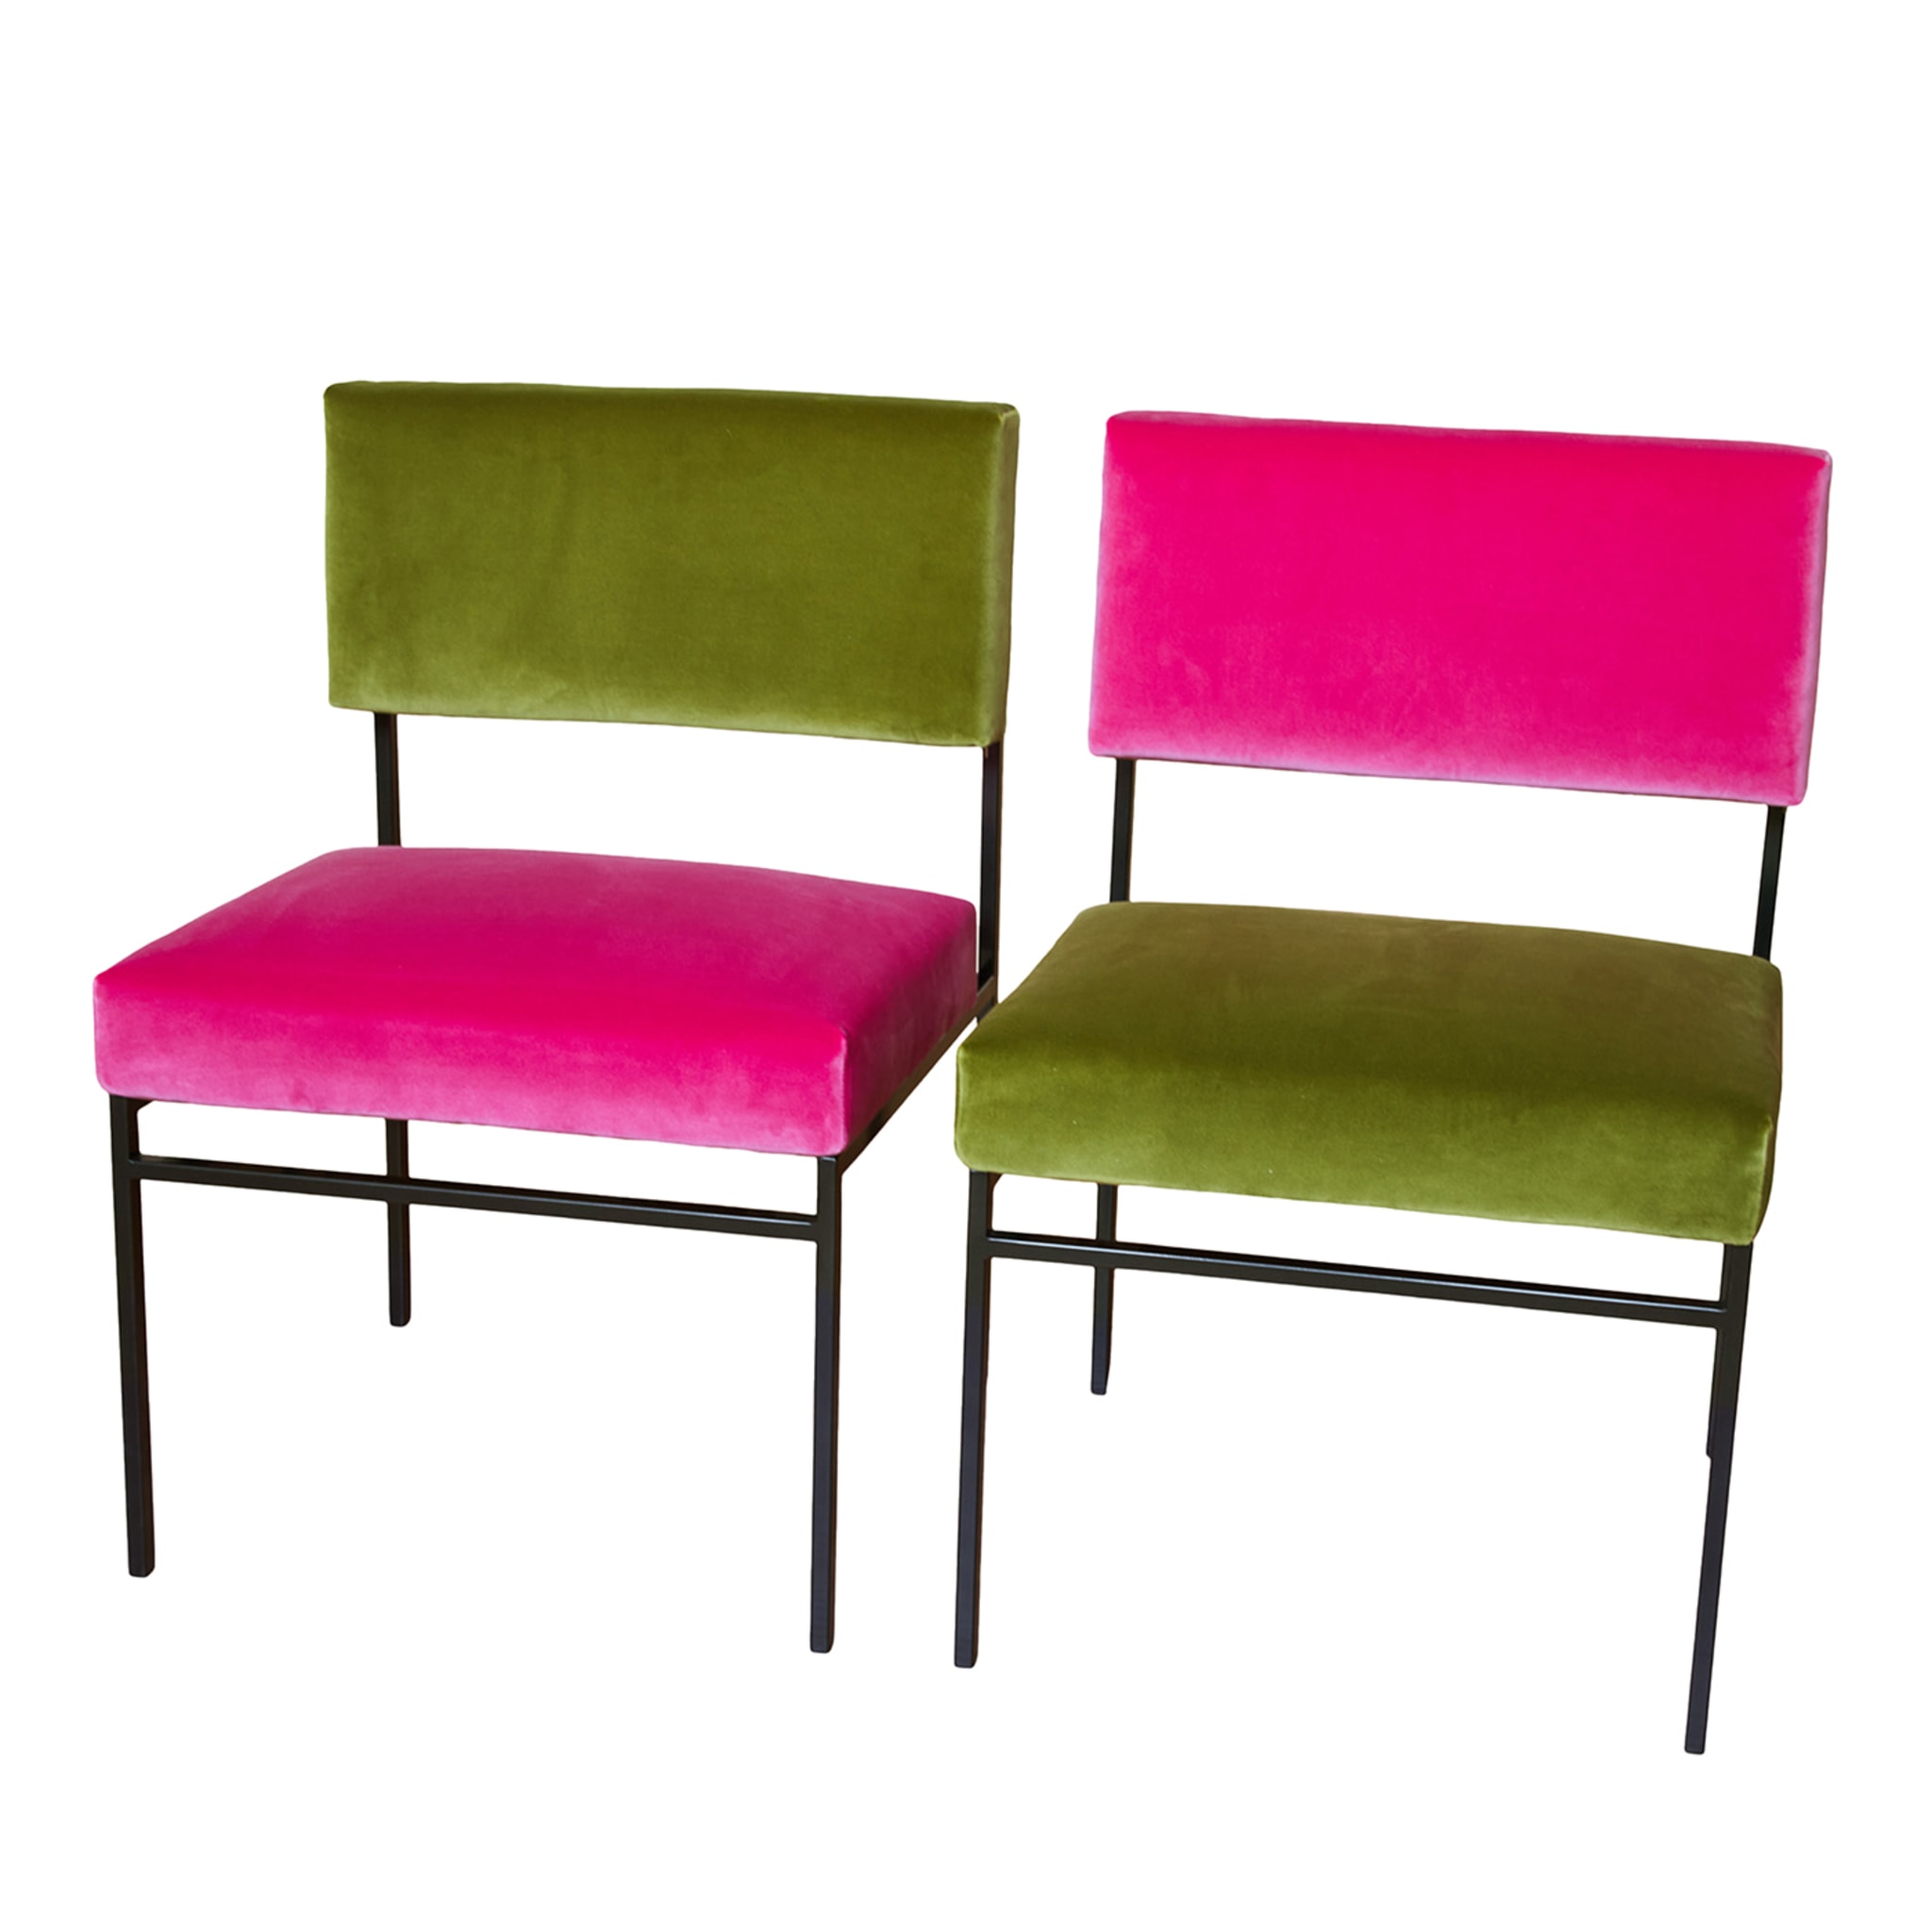 Set of 2 Fuchsia and Green Velvet Aurea Dining Chairs - Main view